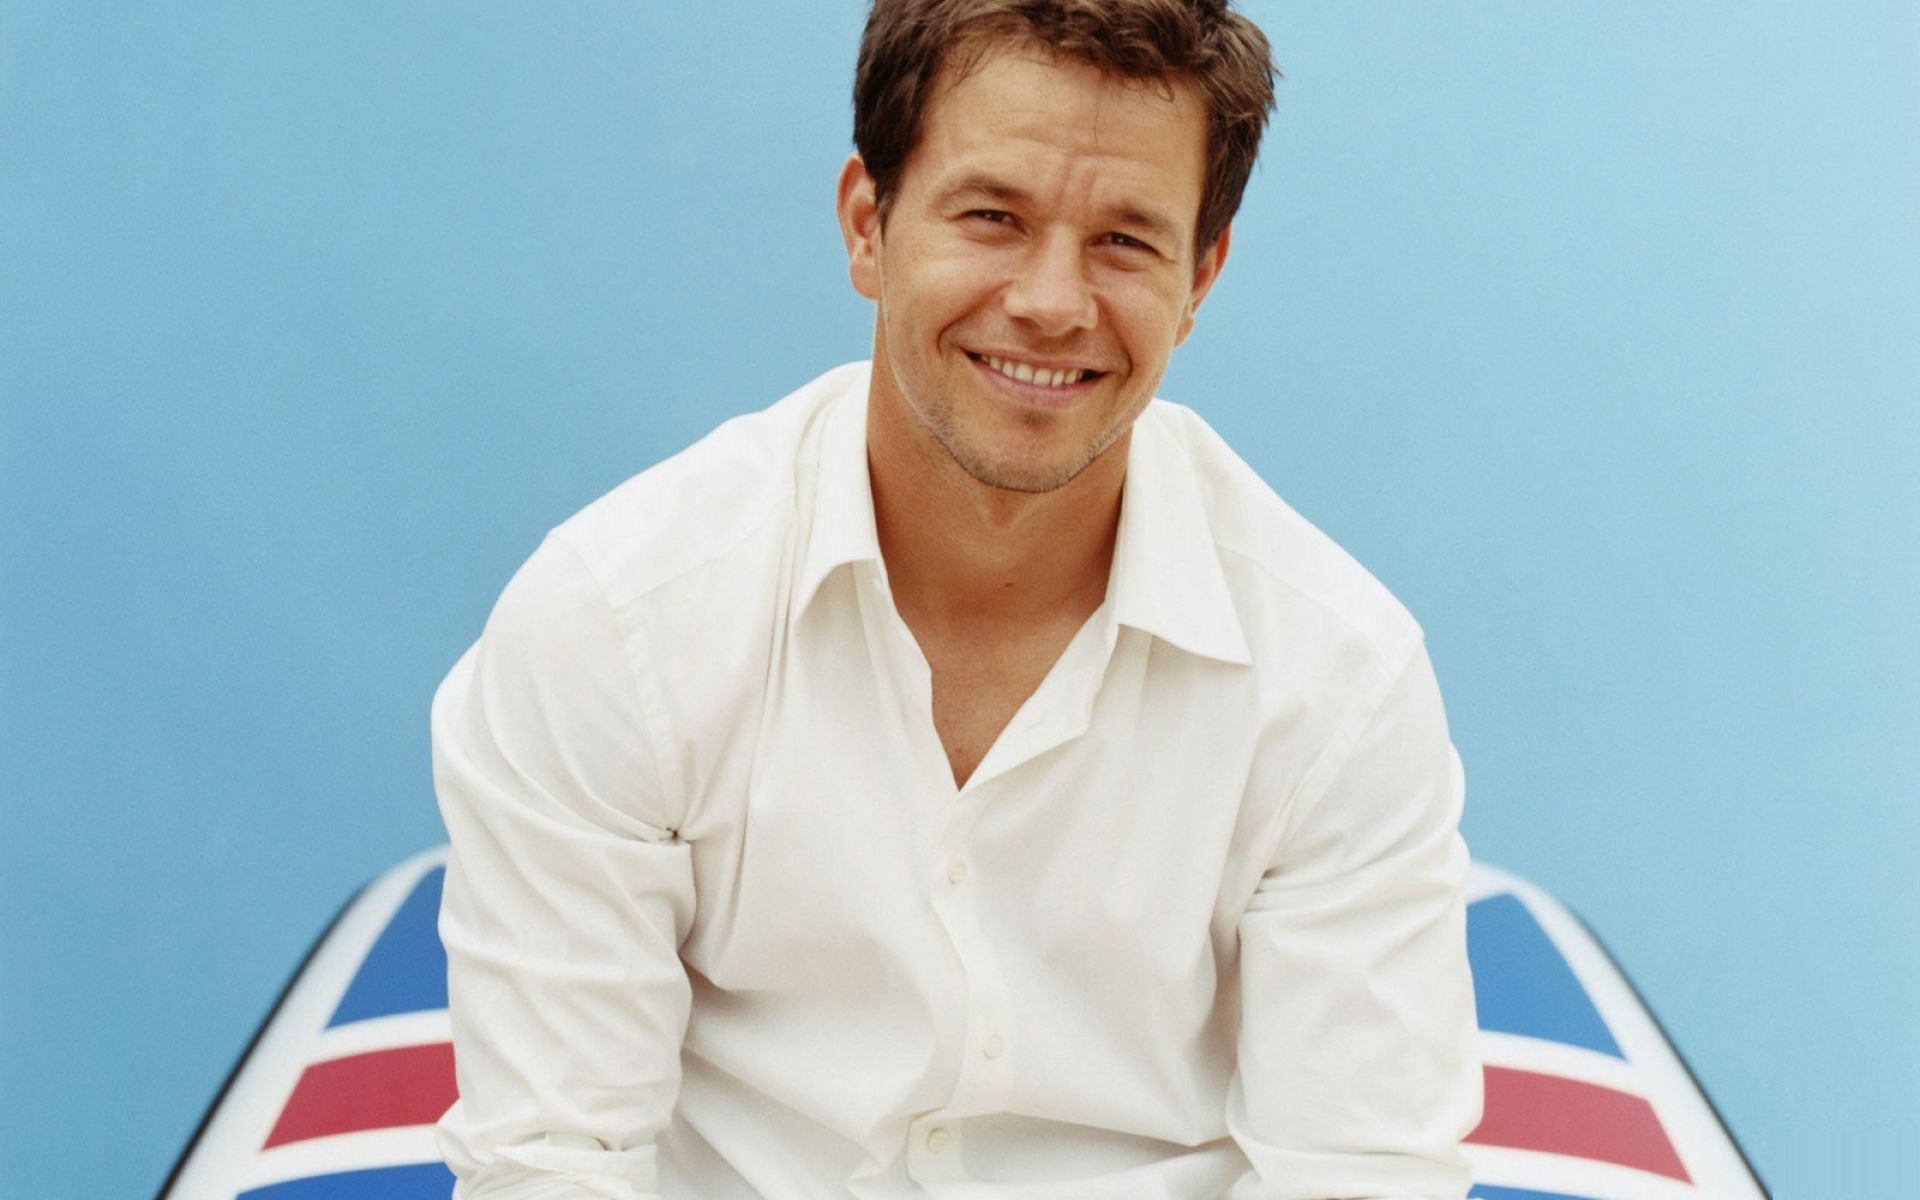 Movie Star Mark Wahlberg Wallpaper And Image